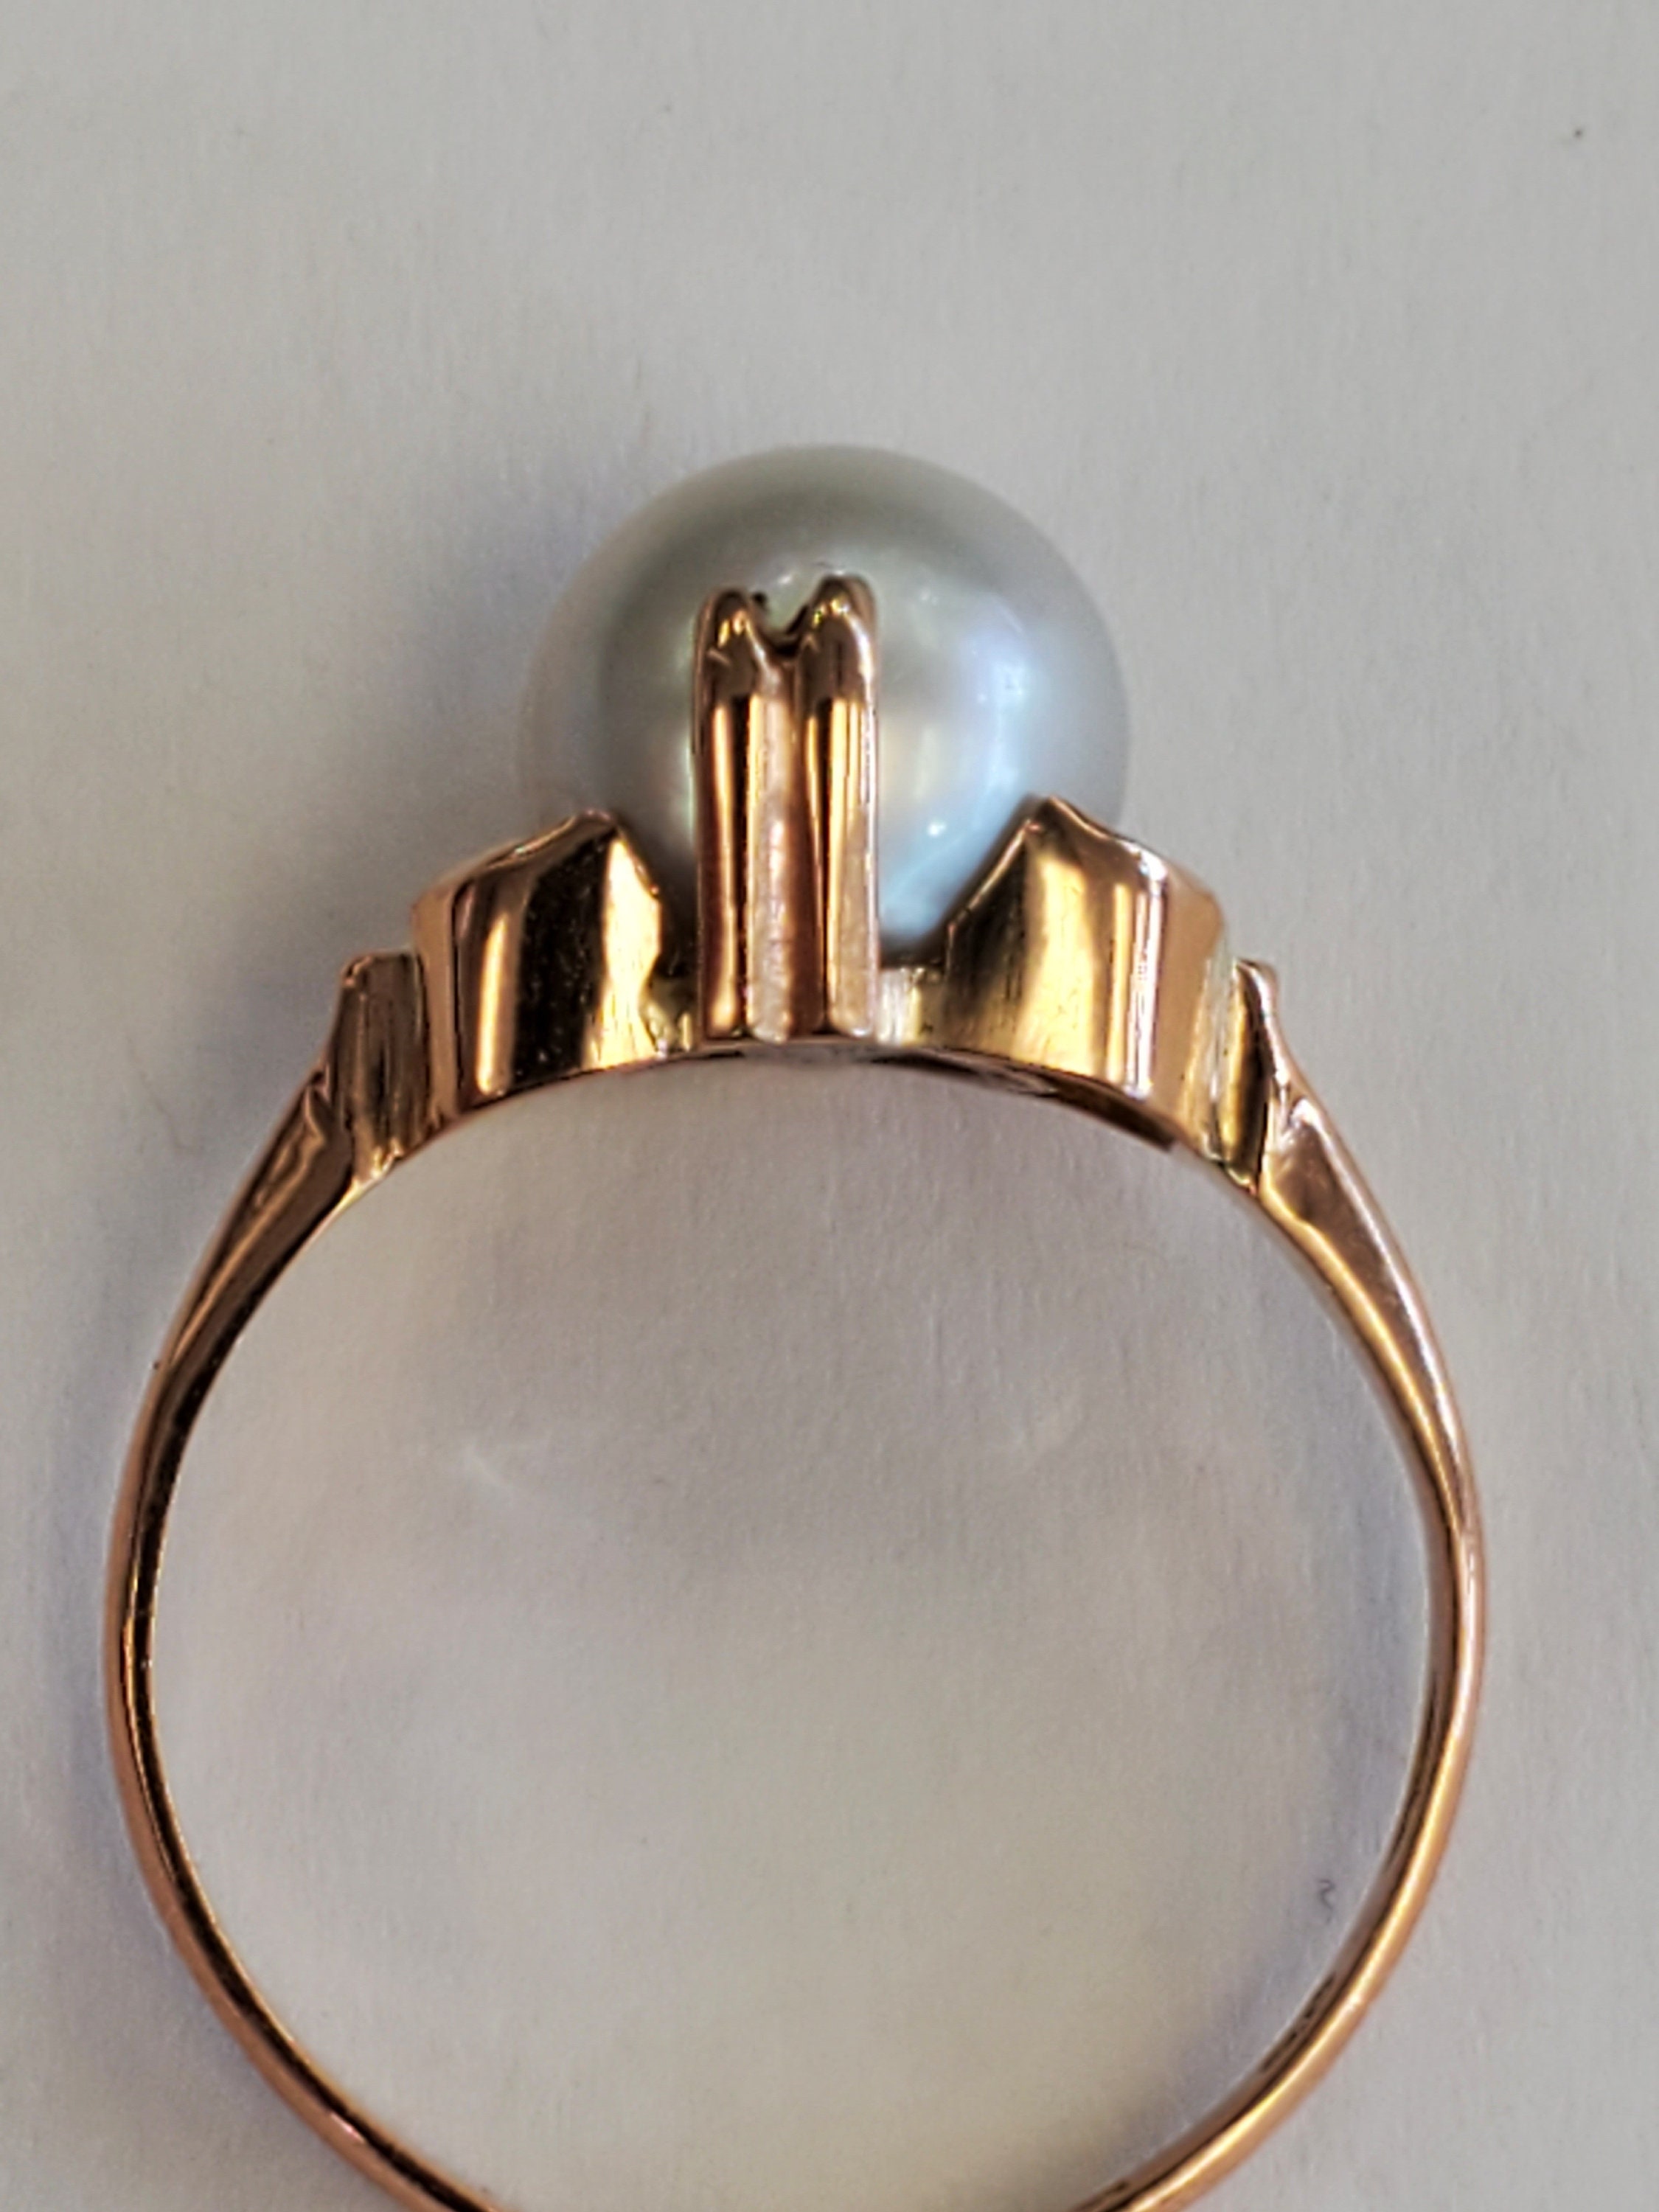 Product Image for Silver gray pearl 18k rose gold CPO hallmarked ring size 6.25